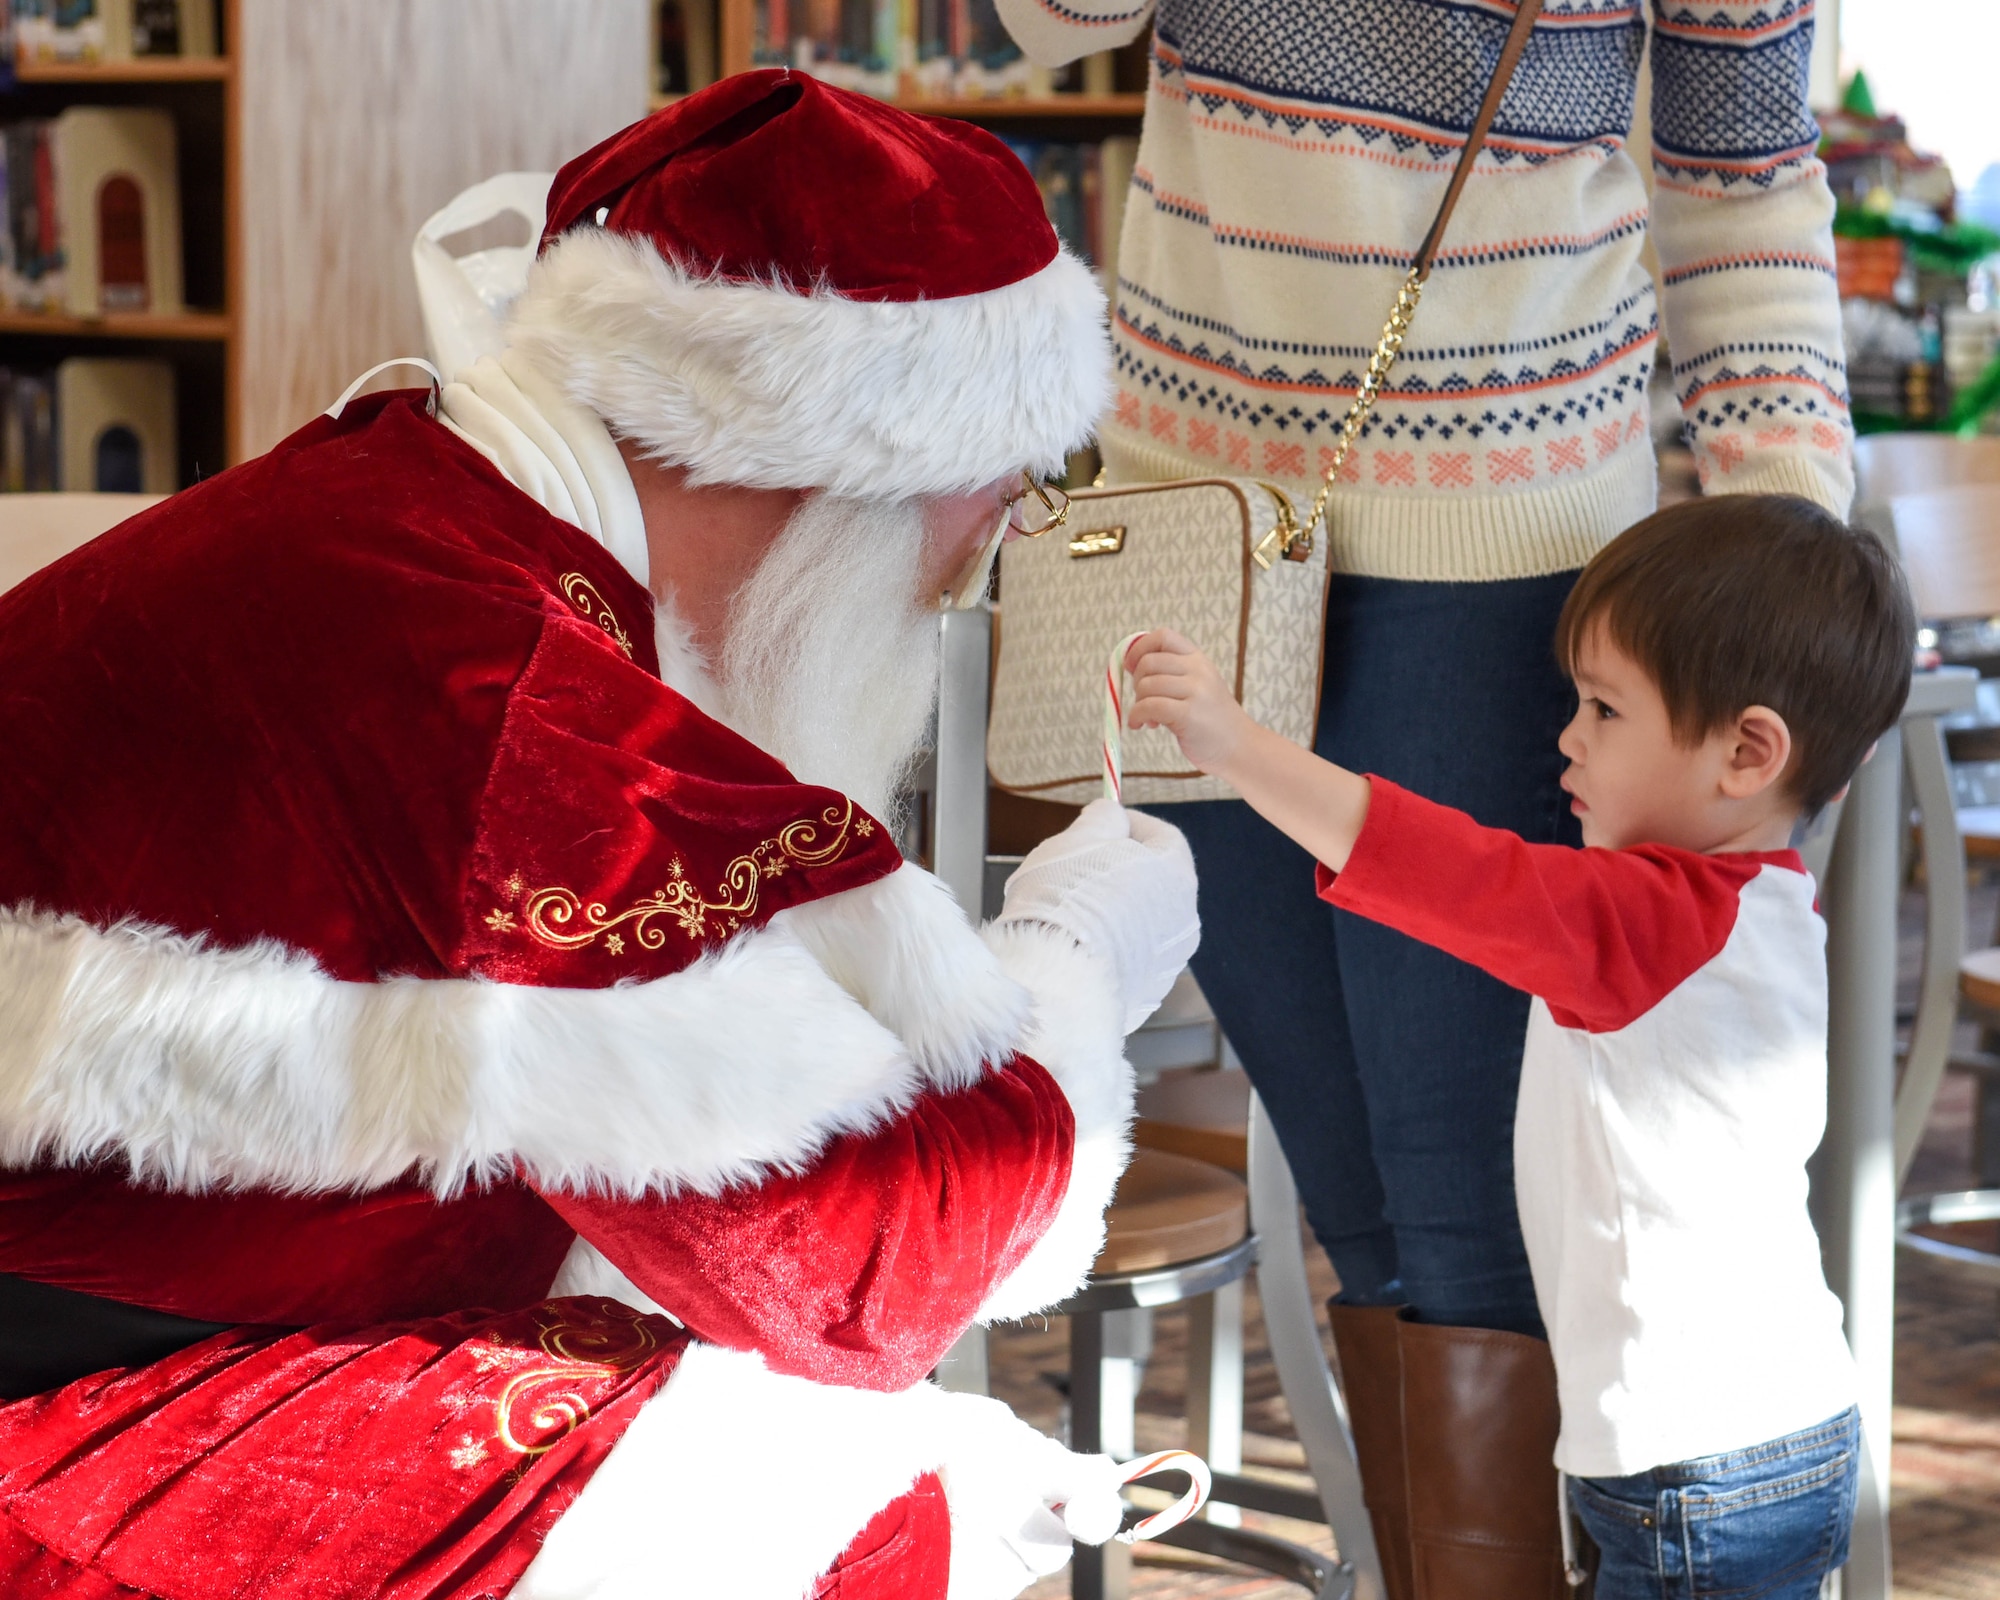 Jolly old Saint Nicholas shares candy canes with children at Ellsworth Air Force Base, S.D., Dec. 13, 2018, during “Santa and Me Story Time.” Saint Nick was escorted by the Ellsworth AFB fire department to Holbrook Library, where he read a holiday book and visited with kids. (U.S. Air Force photo by Airman John Ennis)